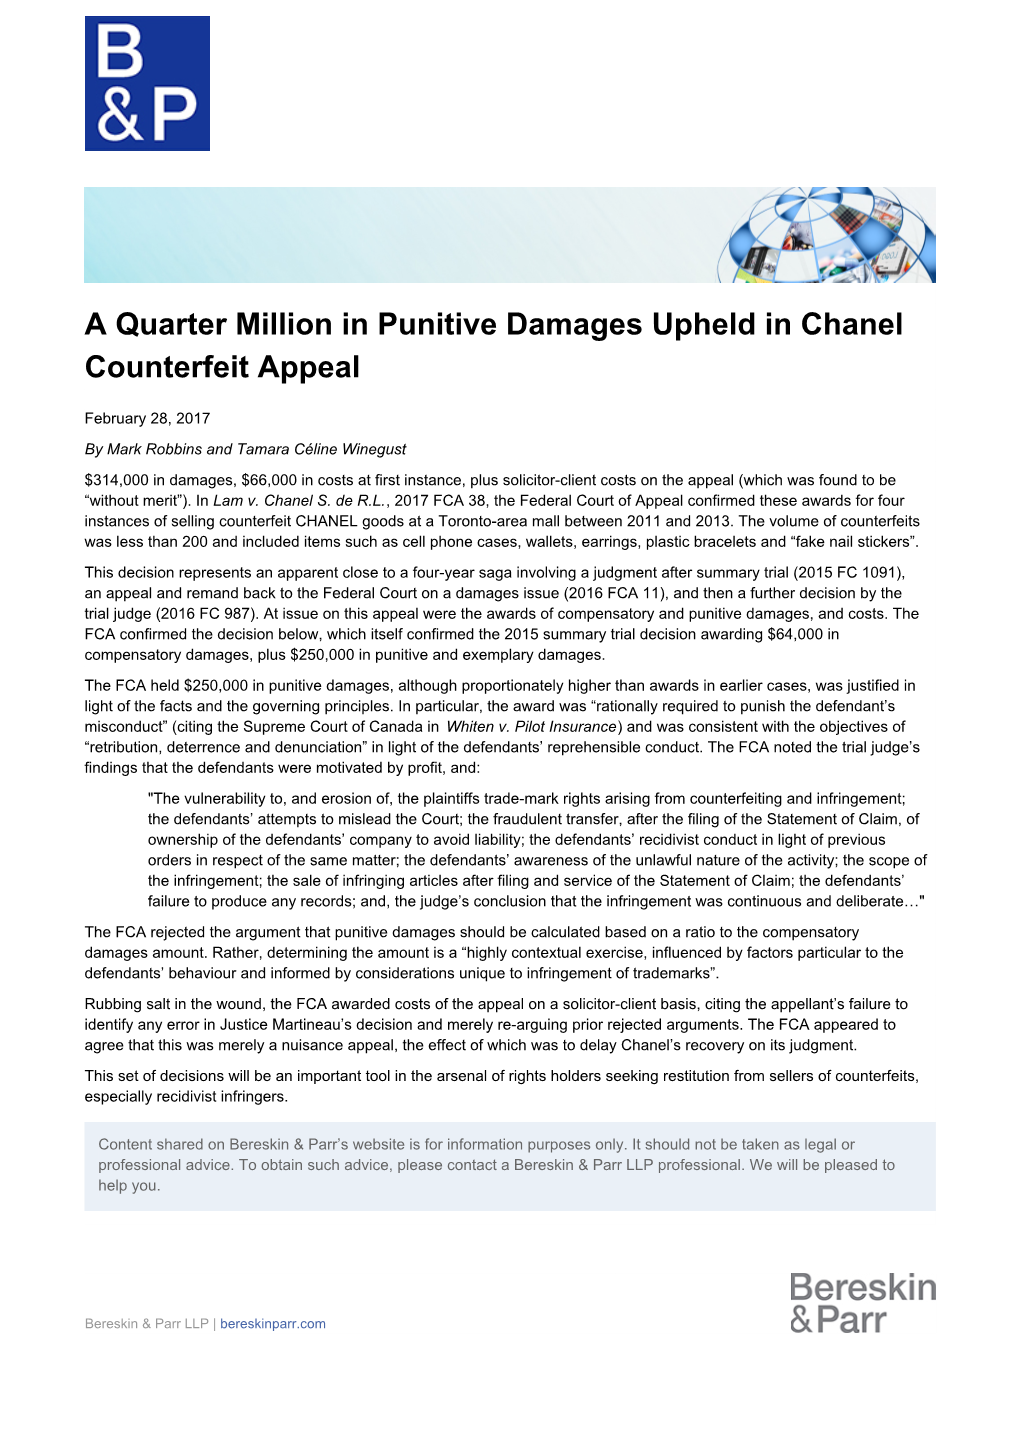 A Quarter Million in Punitive Damages Upheld in Chanel Counterfeit Appeal